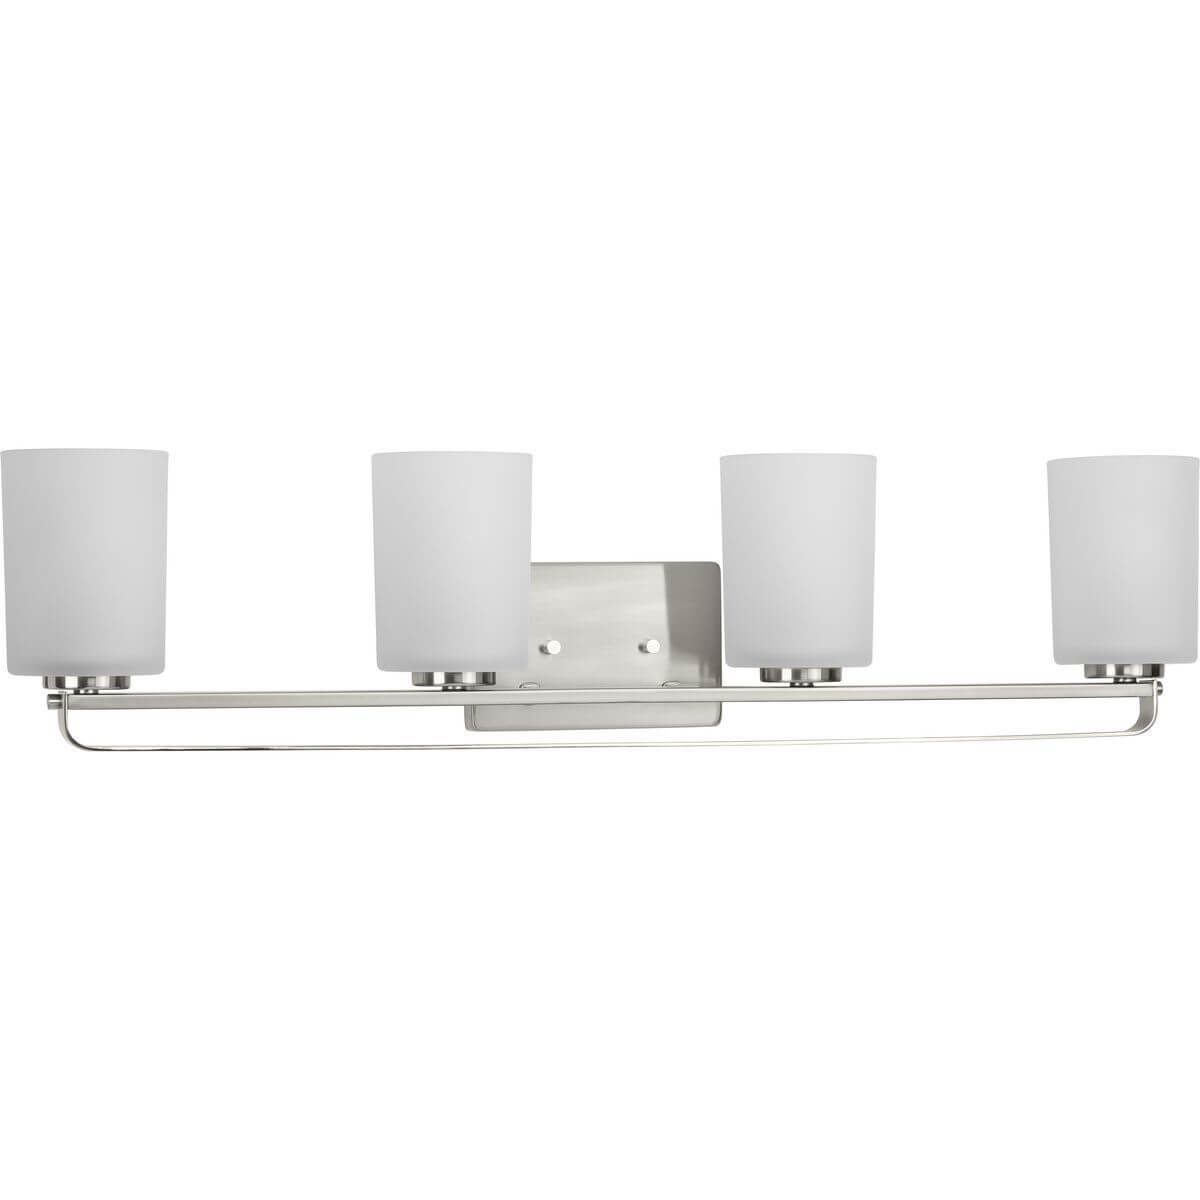 Progress Lighting League 4 Light 33 inch Bath Vanity Light in Brushed Nickel with Etched Glass P300344-009